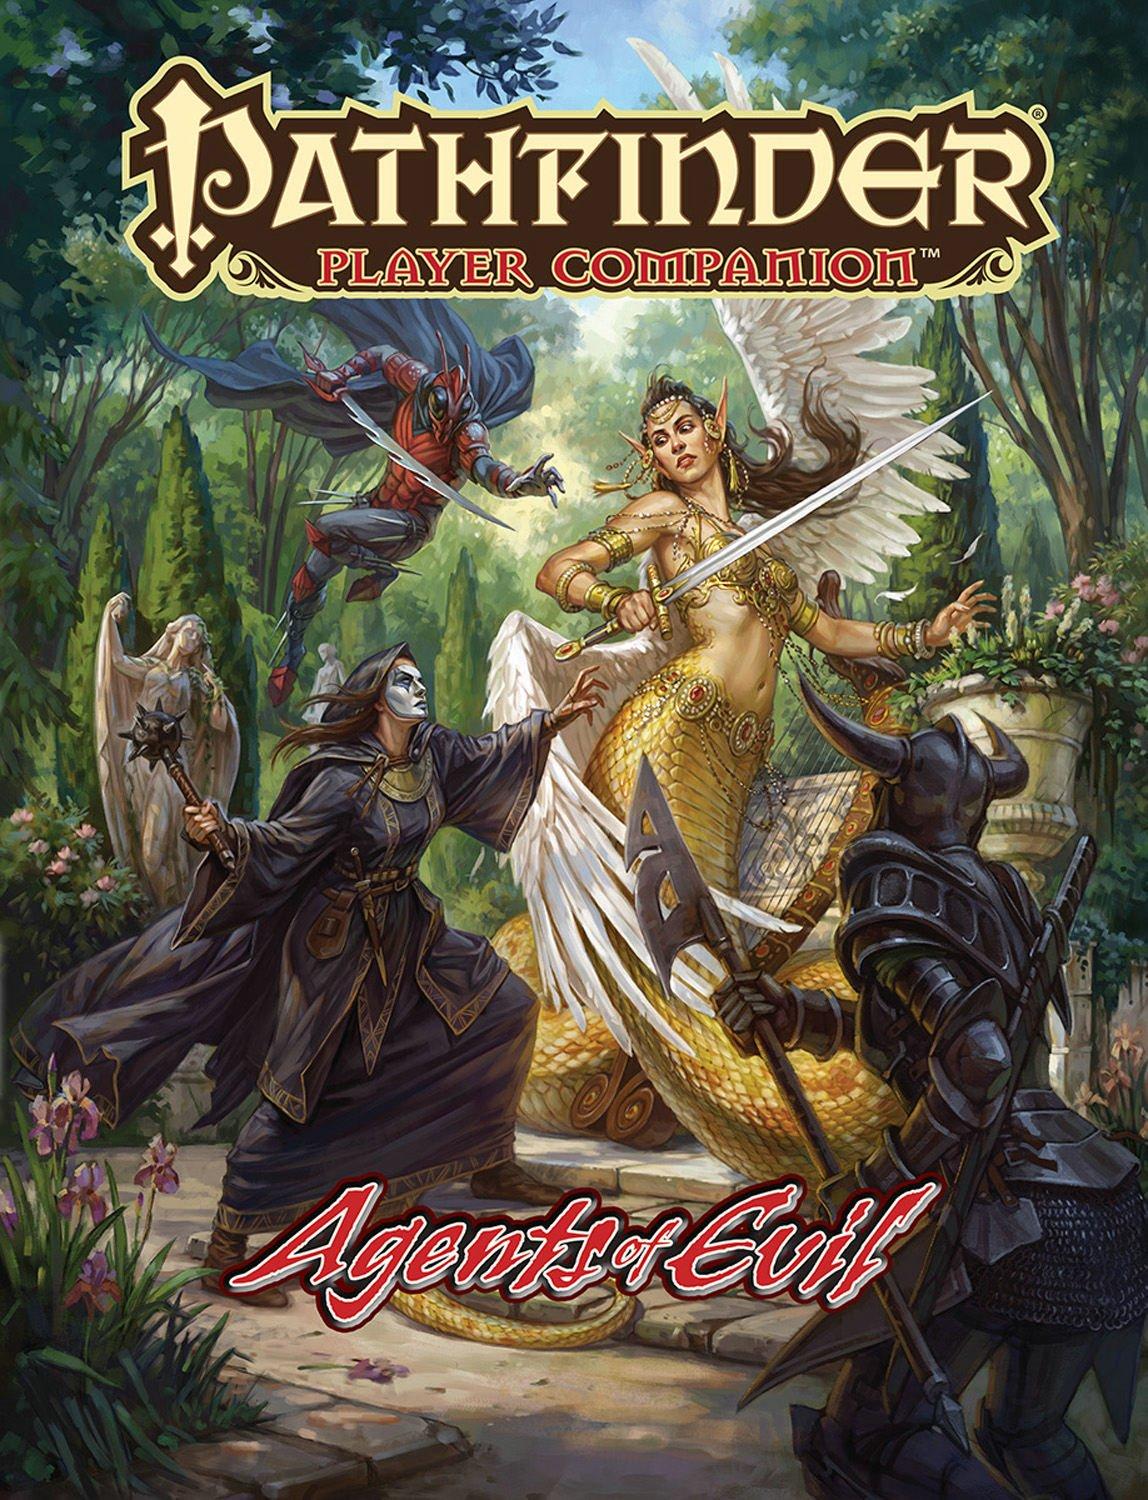 Pathfinder: Player Companion - Agents of Evil